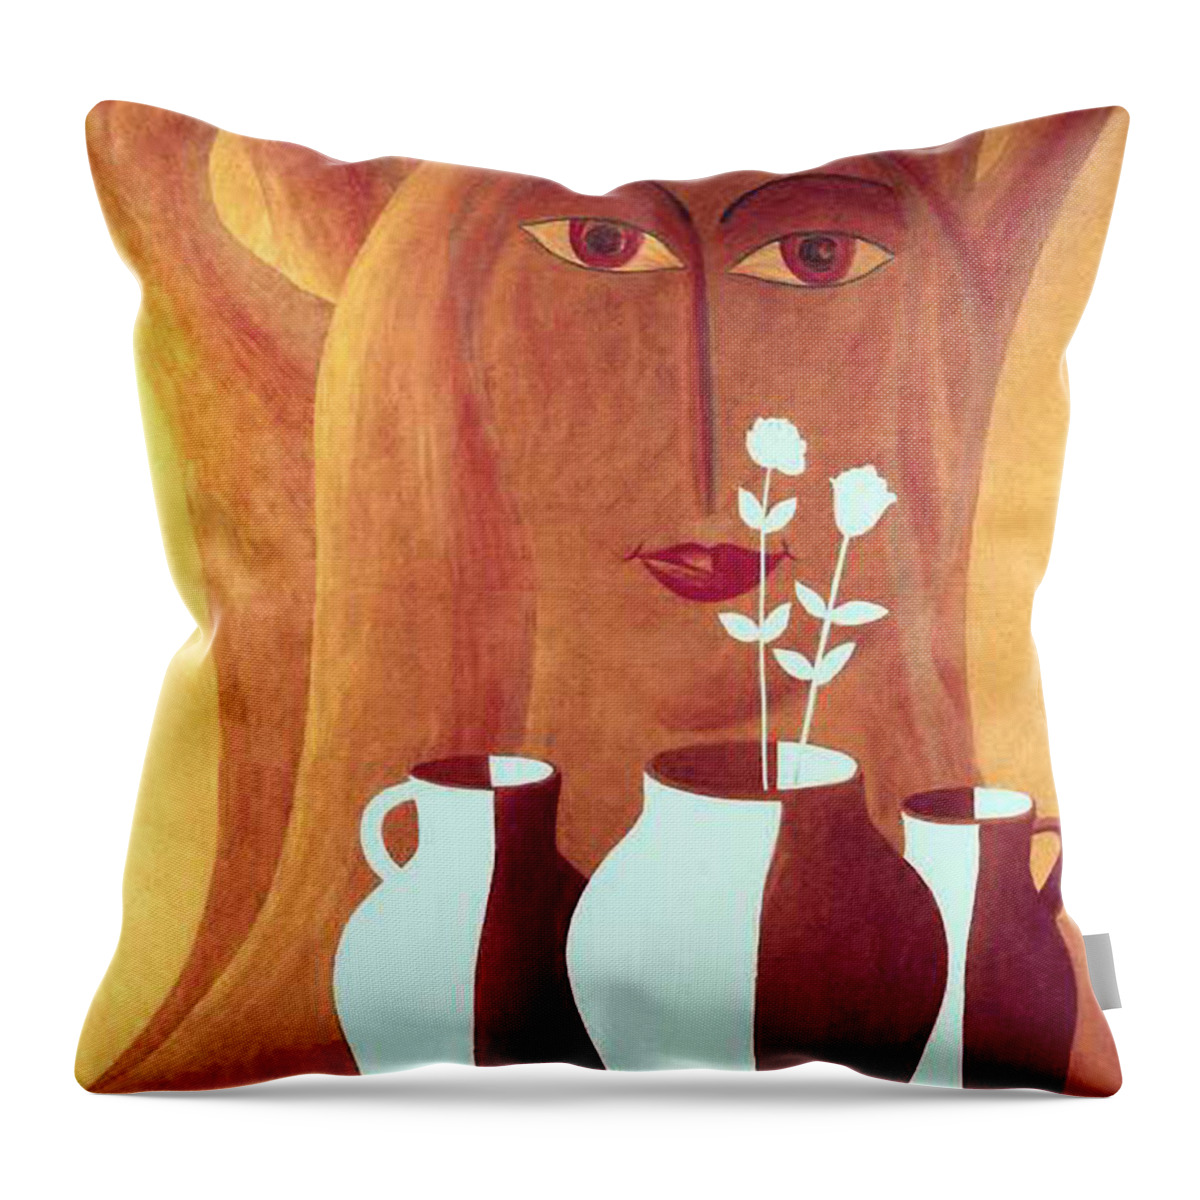 Two Lives Throw Pillow featuring the painting Two Lives by Israel Tsvaygenbaum